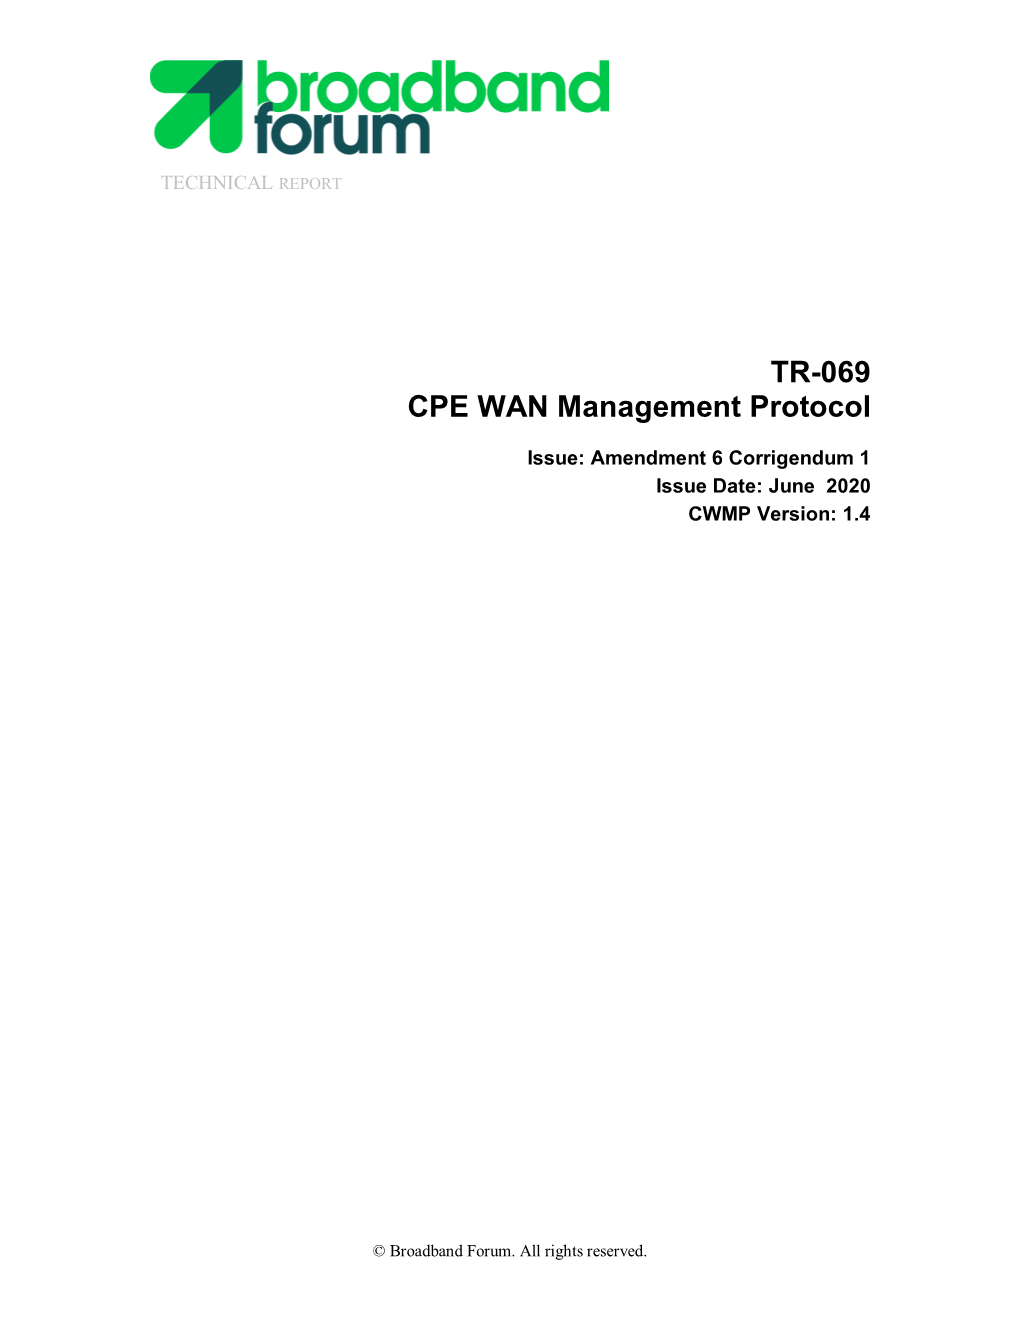 TR-069: CPE WAN Management Protocol